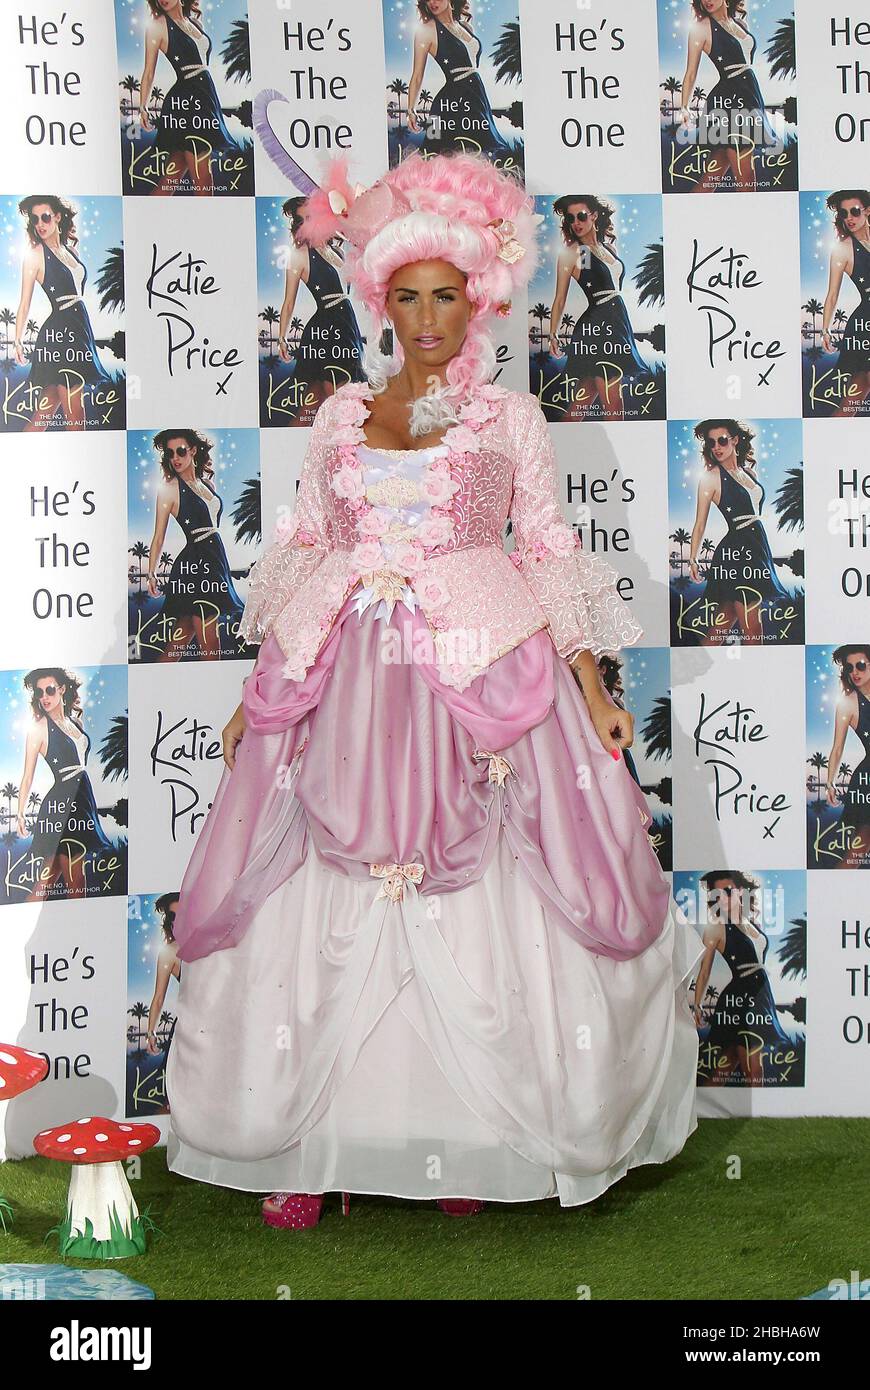 Katie Price launches her new book 'He's the One' at The Worx in London. Stock Photo